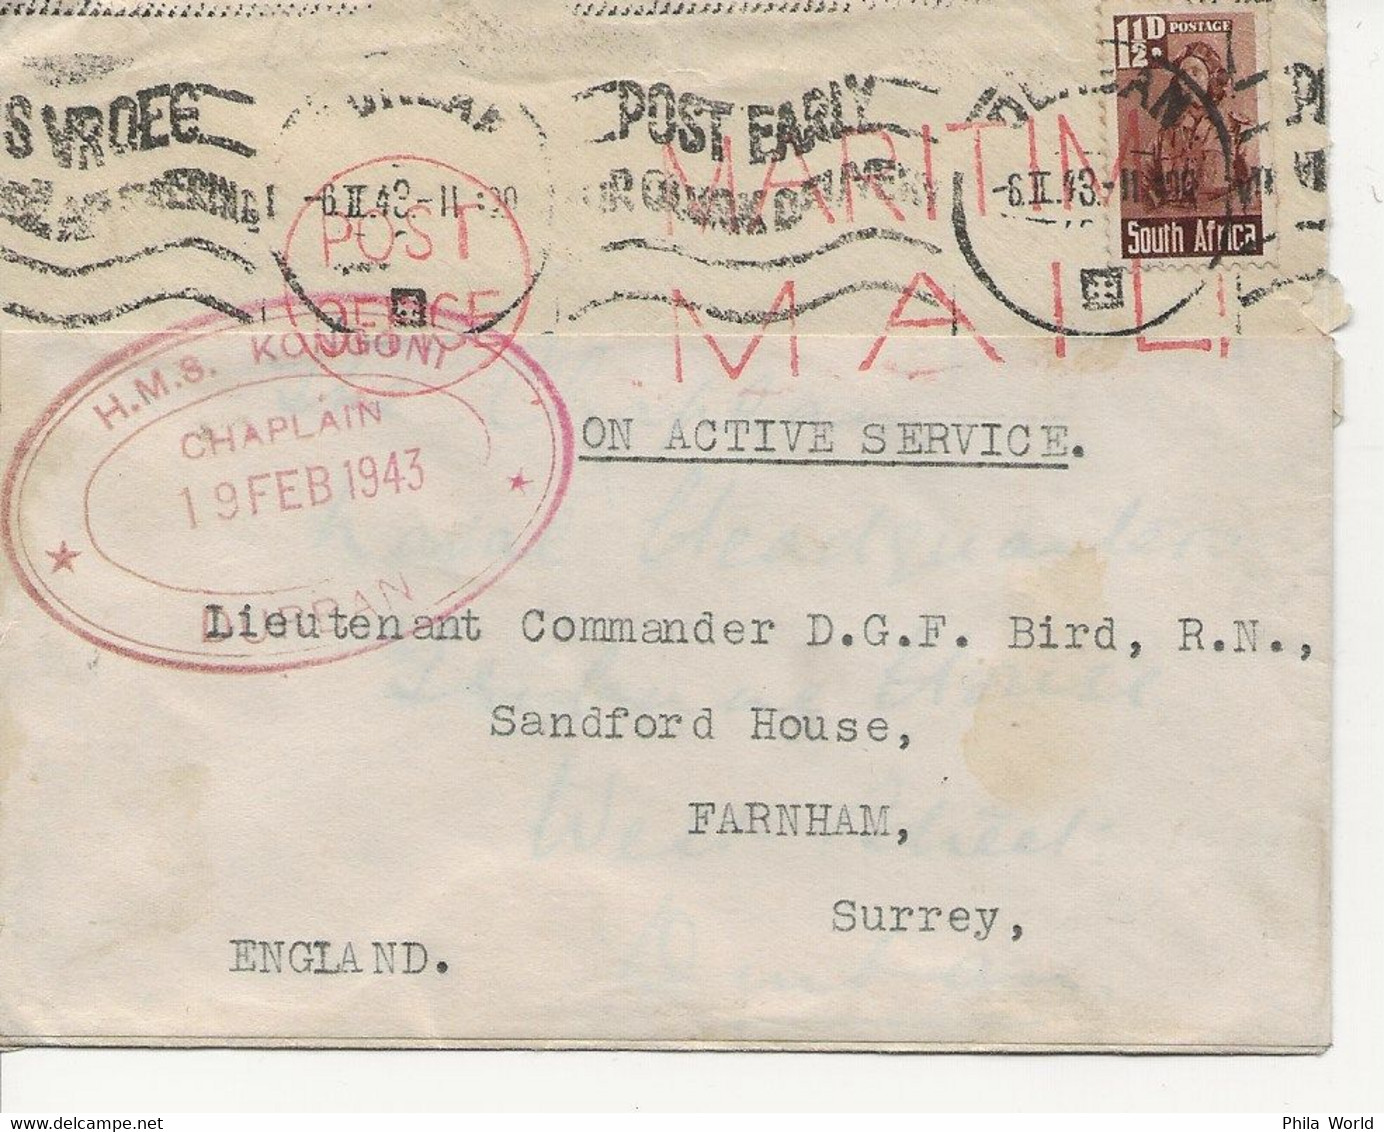 WW2 MARITIME MAIL 1943 LOCAL LETTER  POSTMARKED To The CHAPLAIN NAVAL HEAD QUARTERS DURBAN READDRESSED To ENGLAND - Bateaux